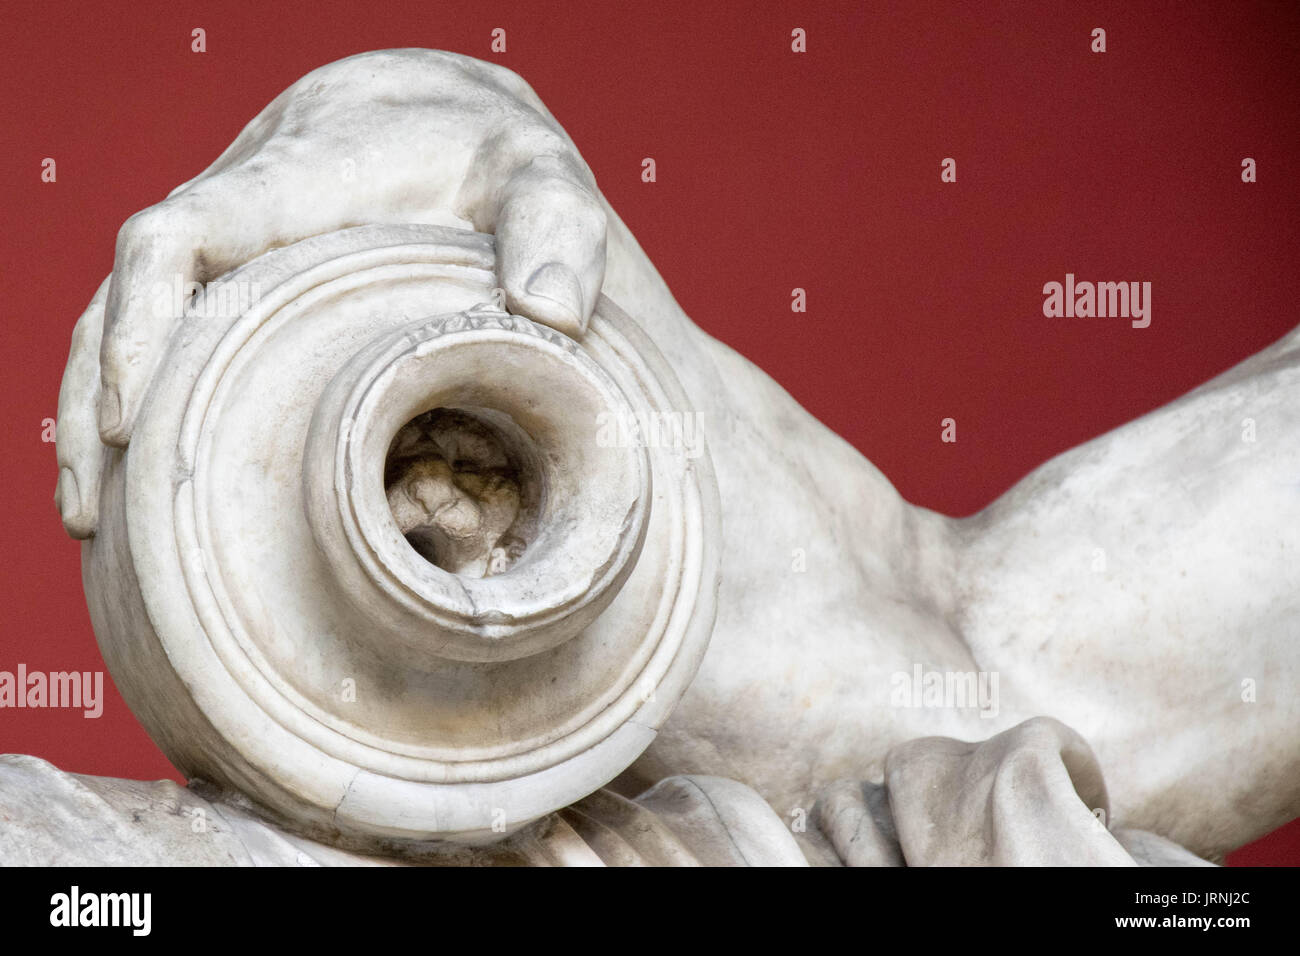 Detail of a lion's head carved inside a vase, Statue of the river god, (Arno);  Musei Vaticani, Vatican City. Taken with Nikon D5300 Stock Photo